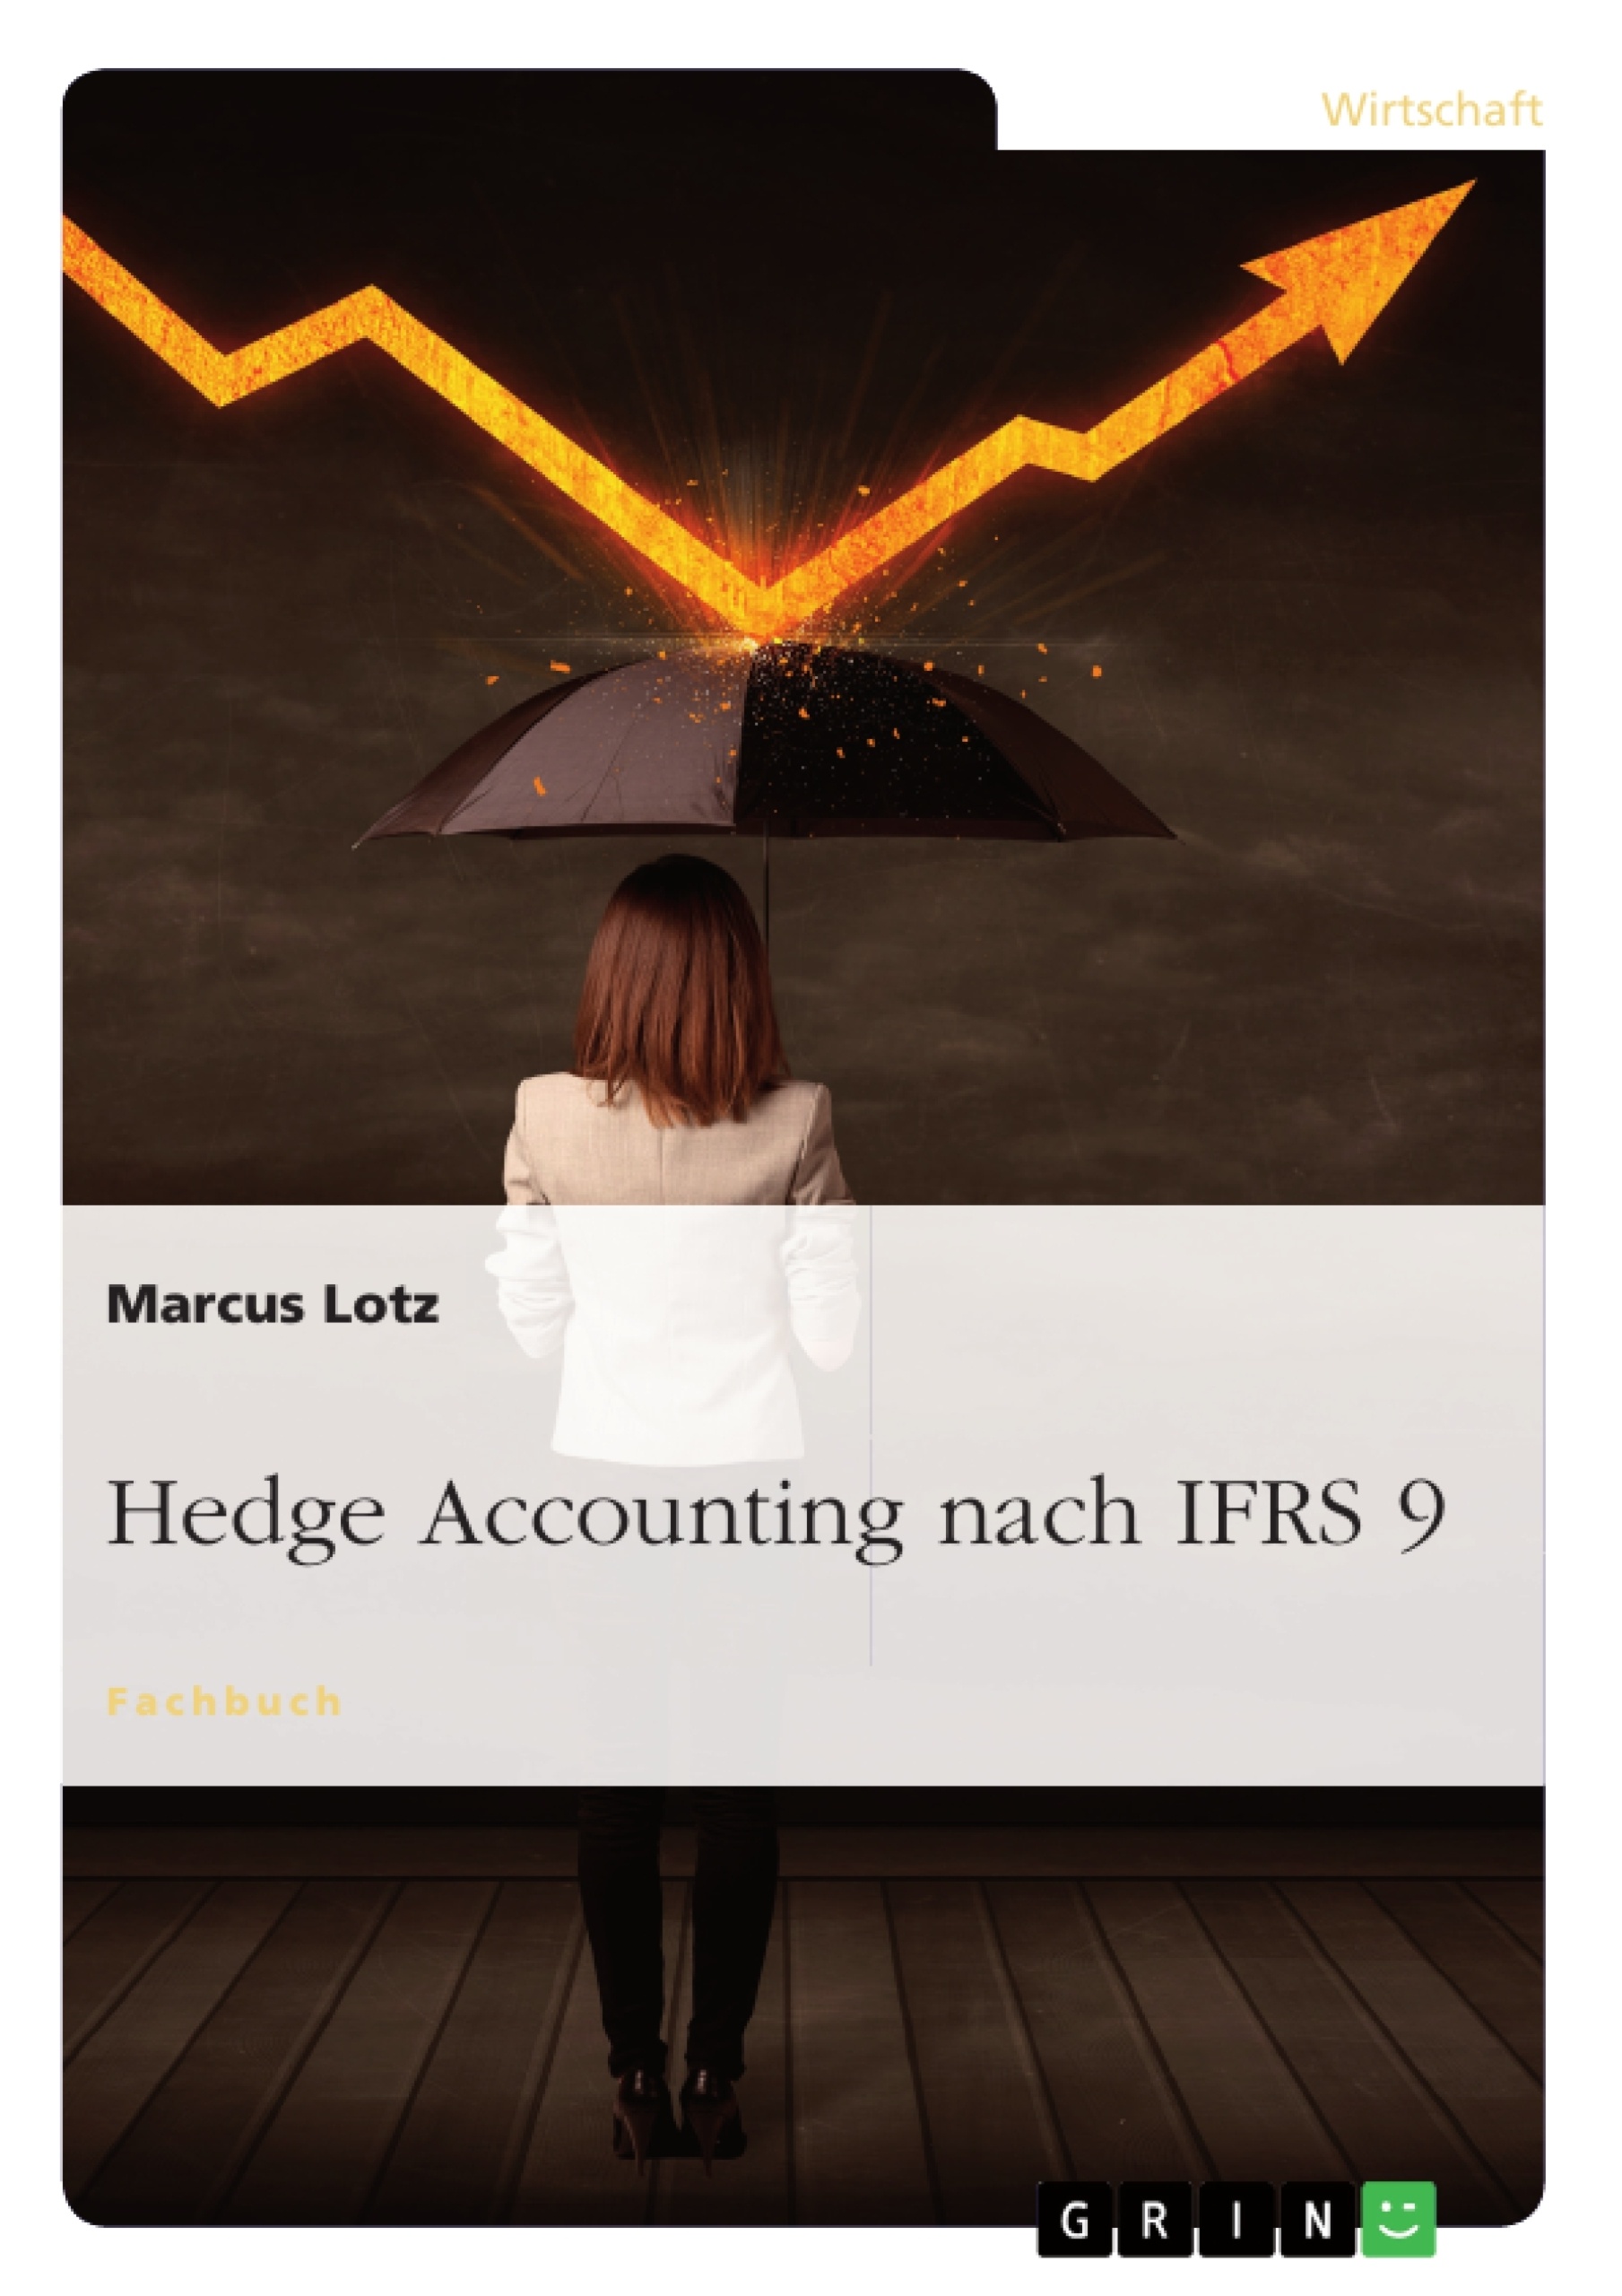 Title: Hedge Accounting nach IFRS 9